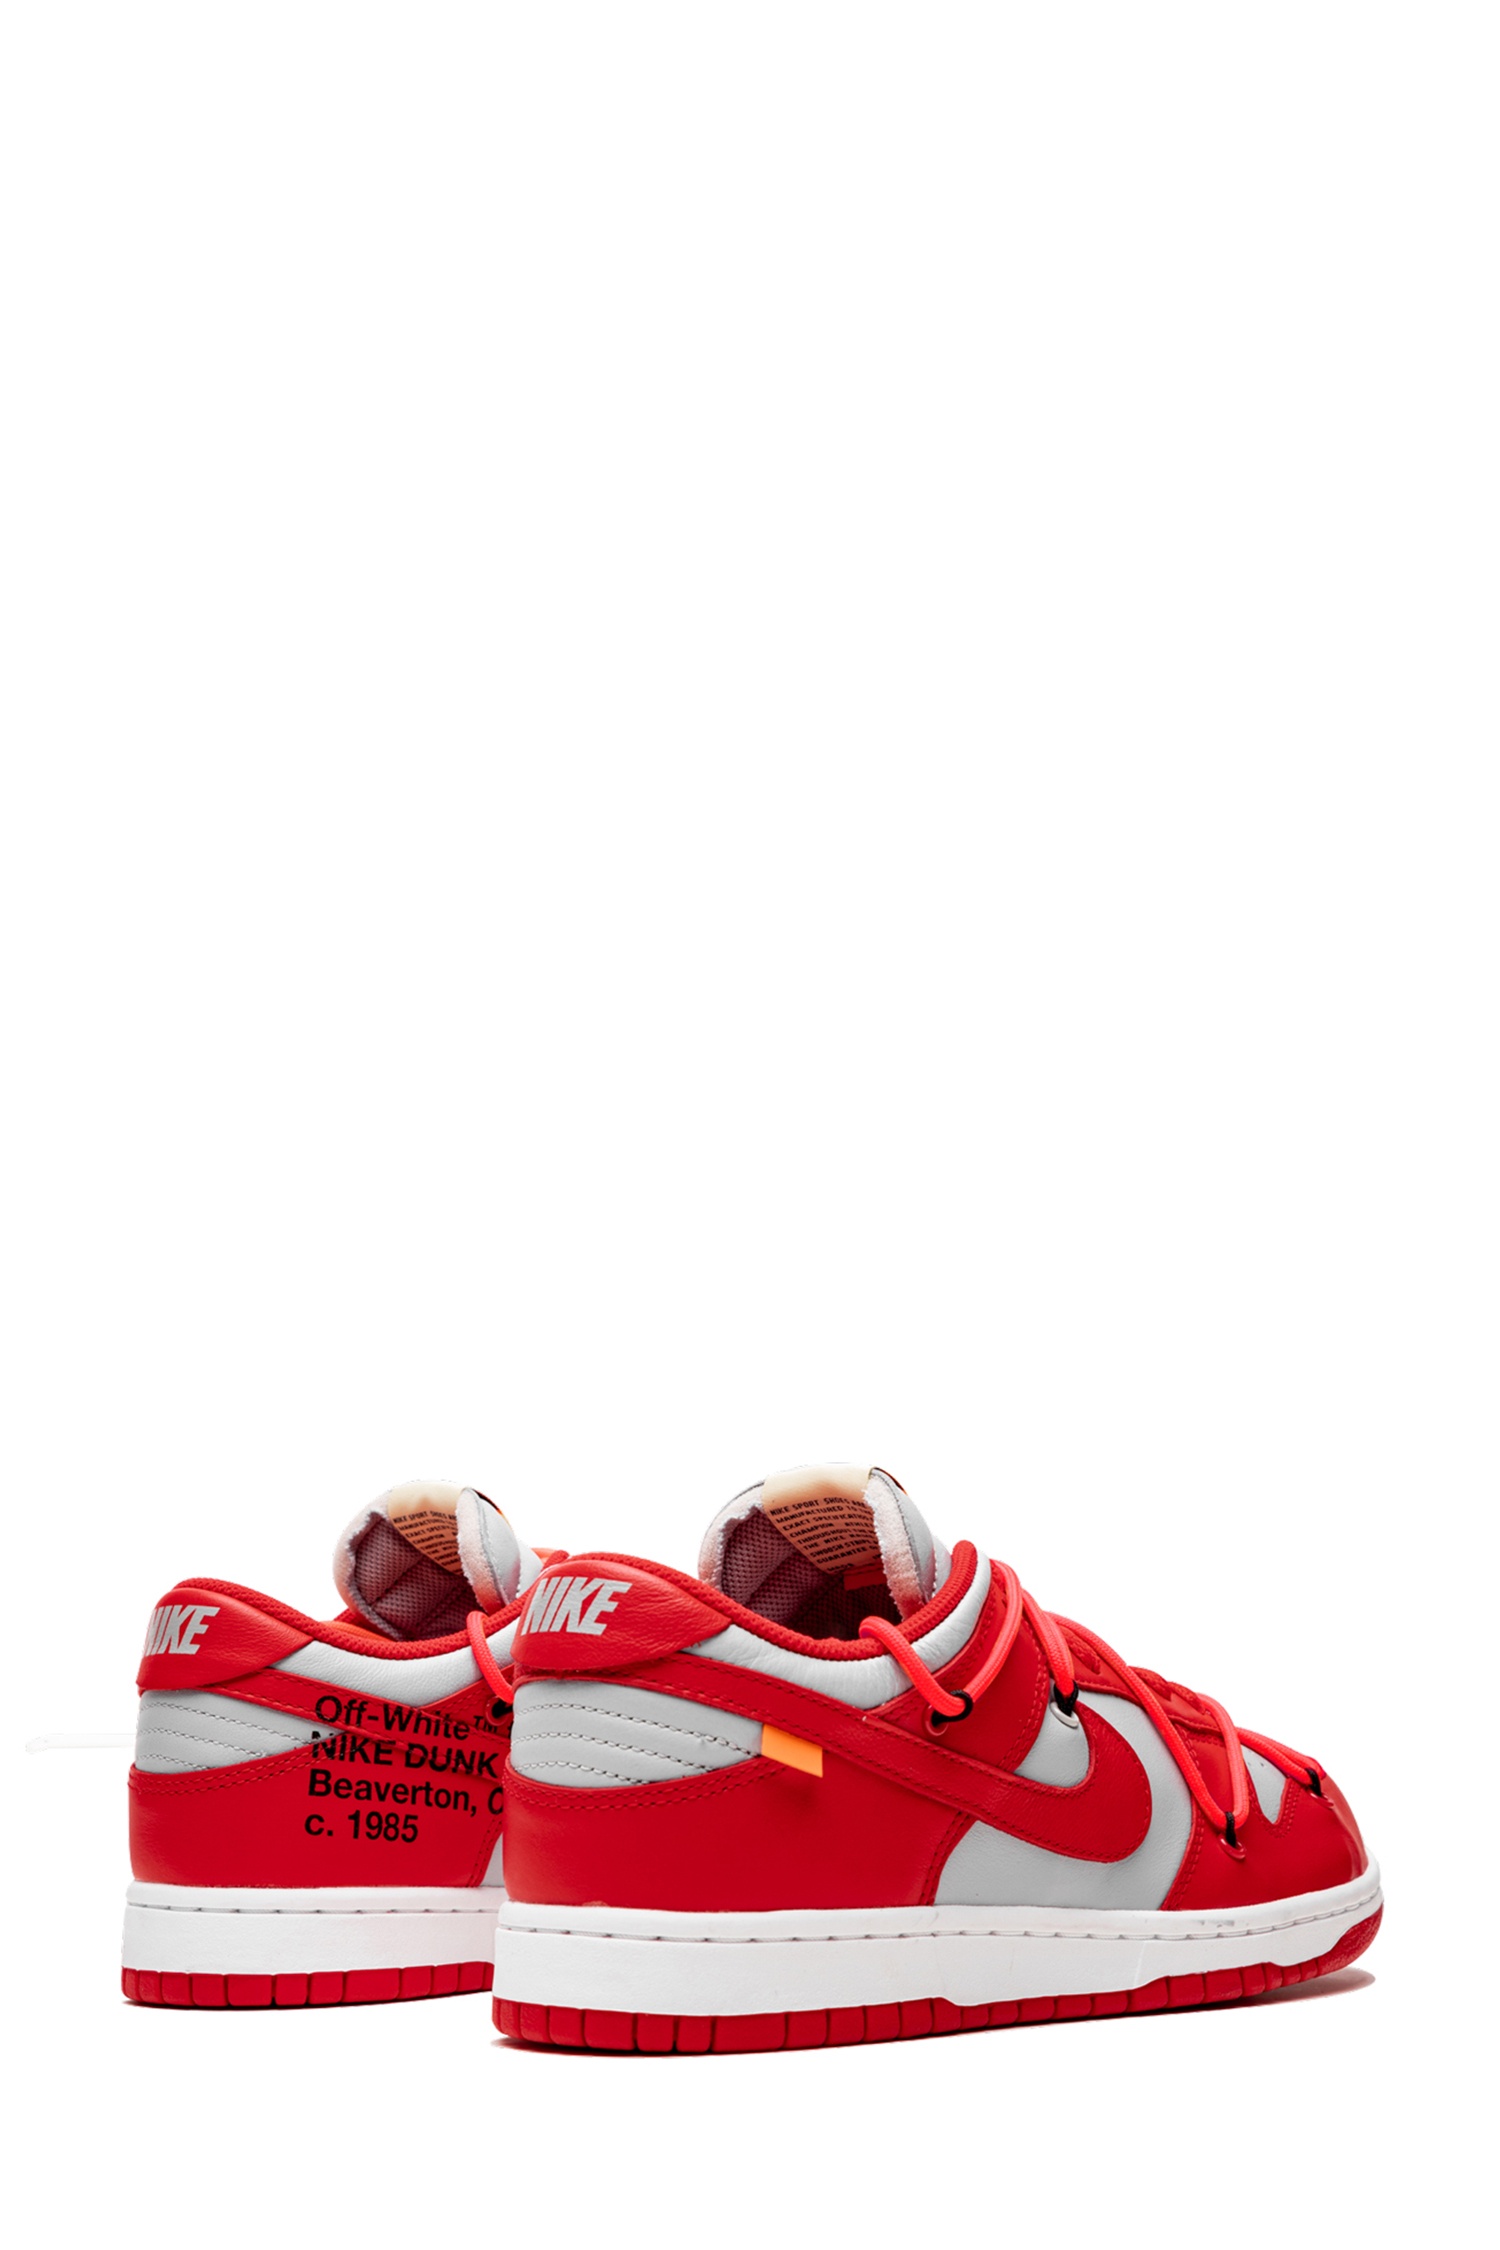 nike dunk low x off white red